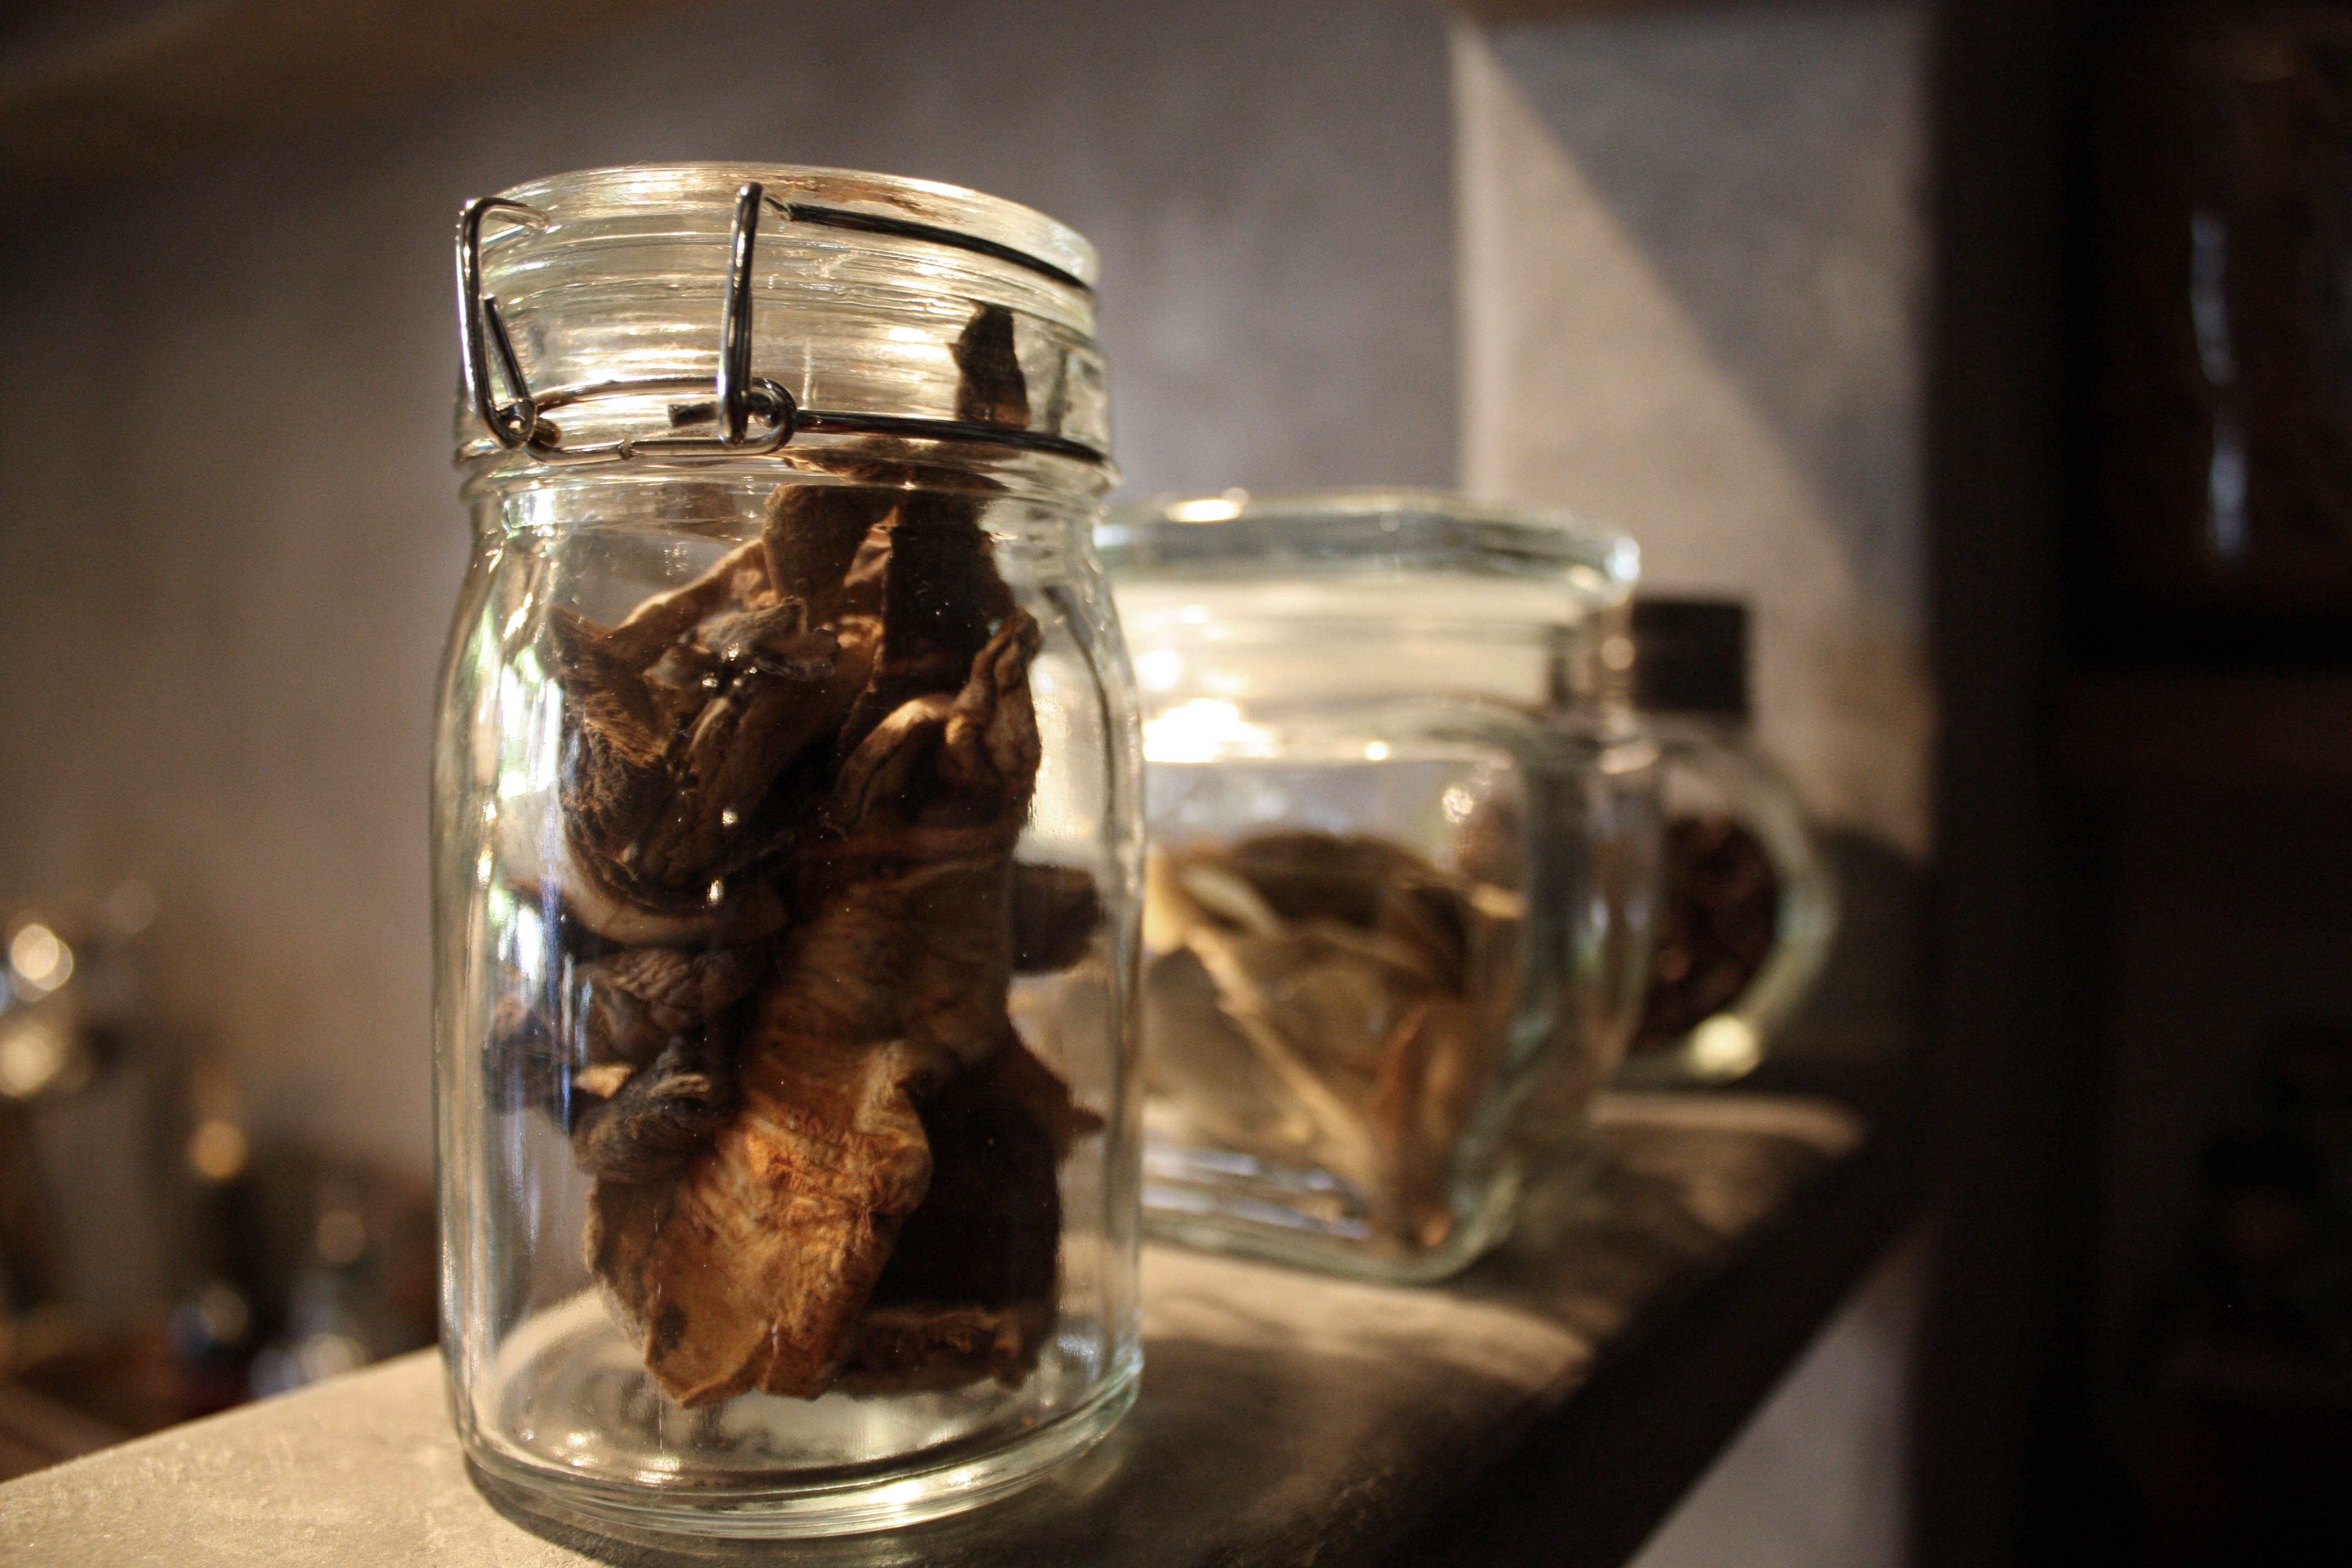 l&l at home-dried mushrooms and herbs -glass bottles and jars - image by L for Thinking Outside the Box - www.linenlavenderlife.com